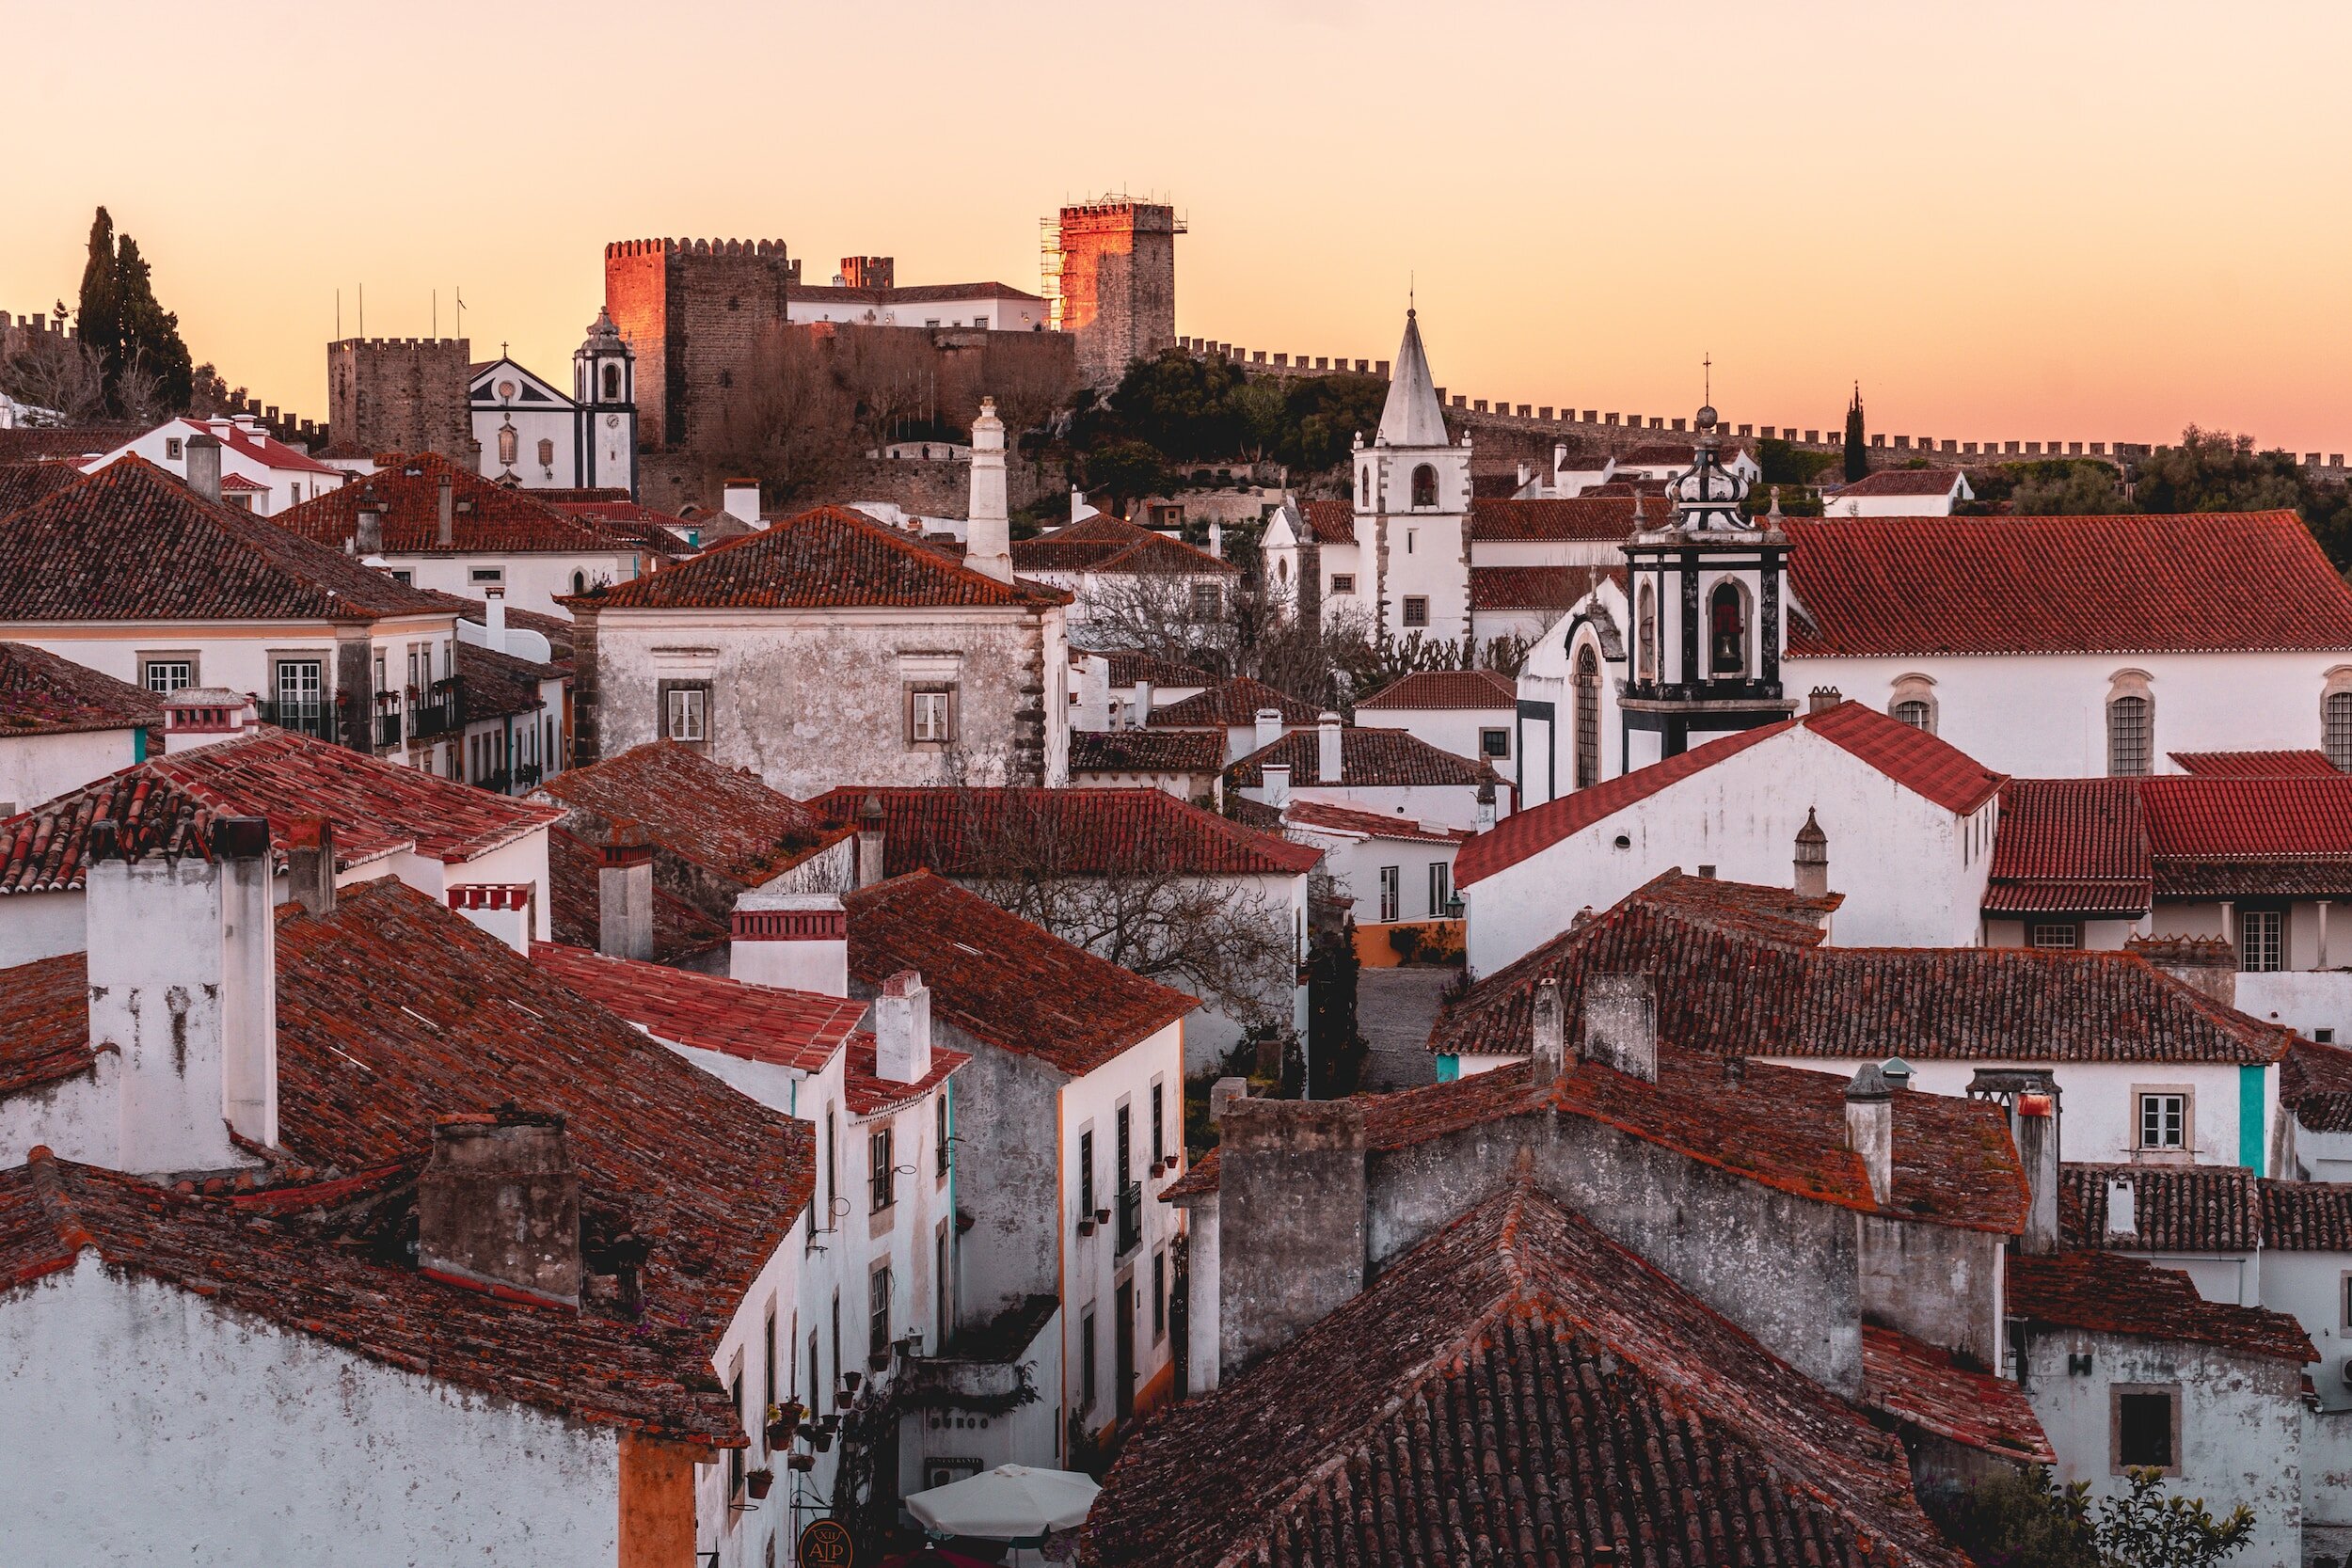 Discover the Southwest of Portugal - 7 nights